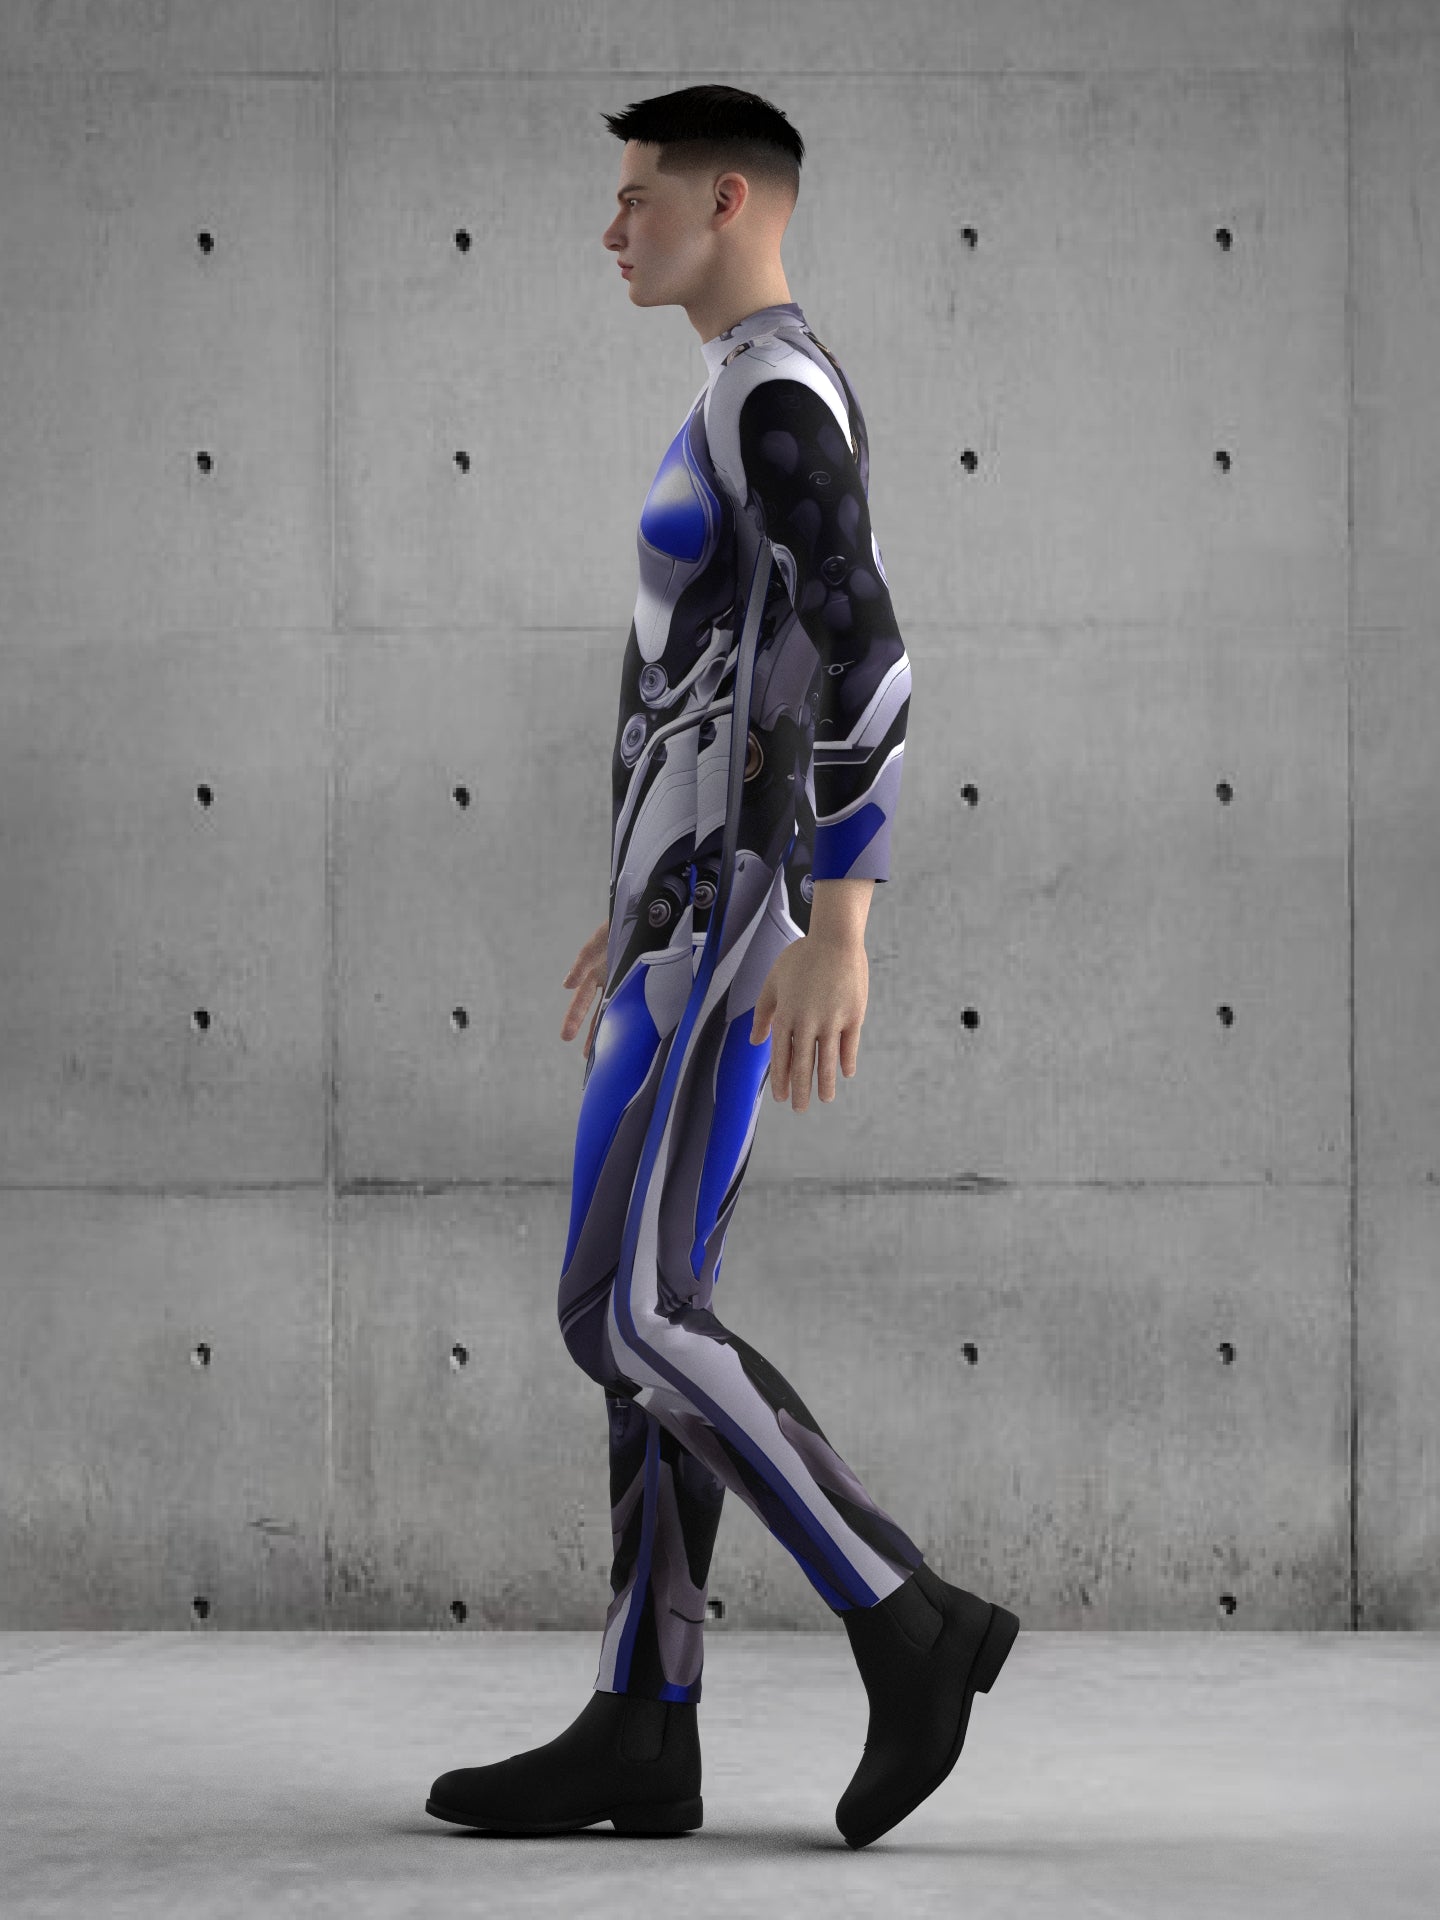 A47M Cyberpunk Costume for Men, Custom Fit Available, Futuristic Robot Cosplay, Halloween Costume